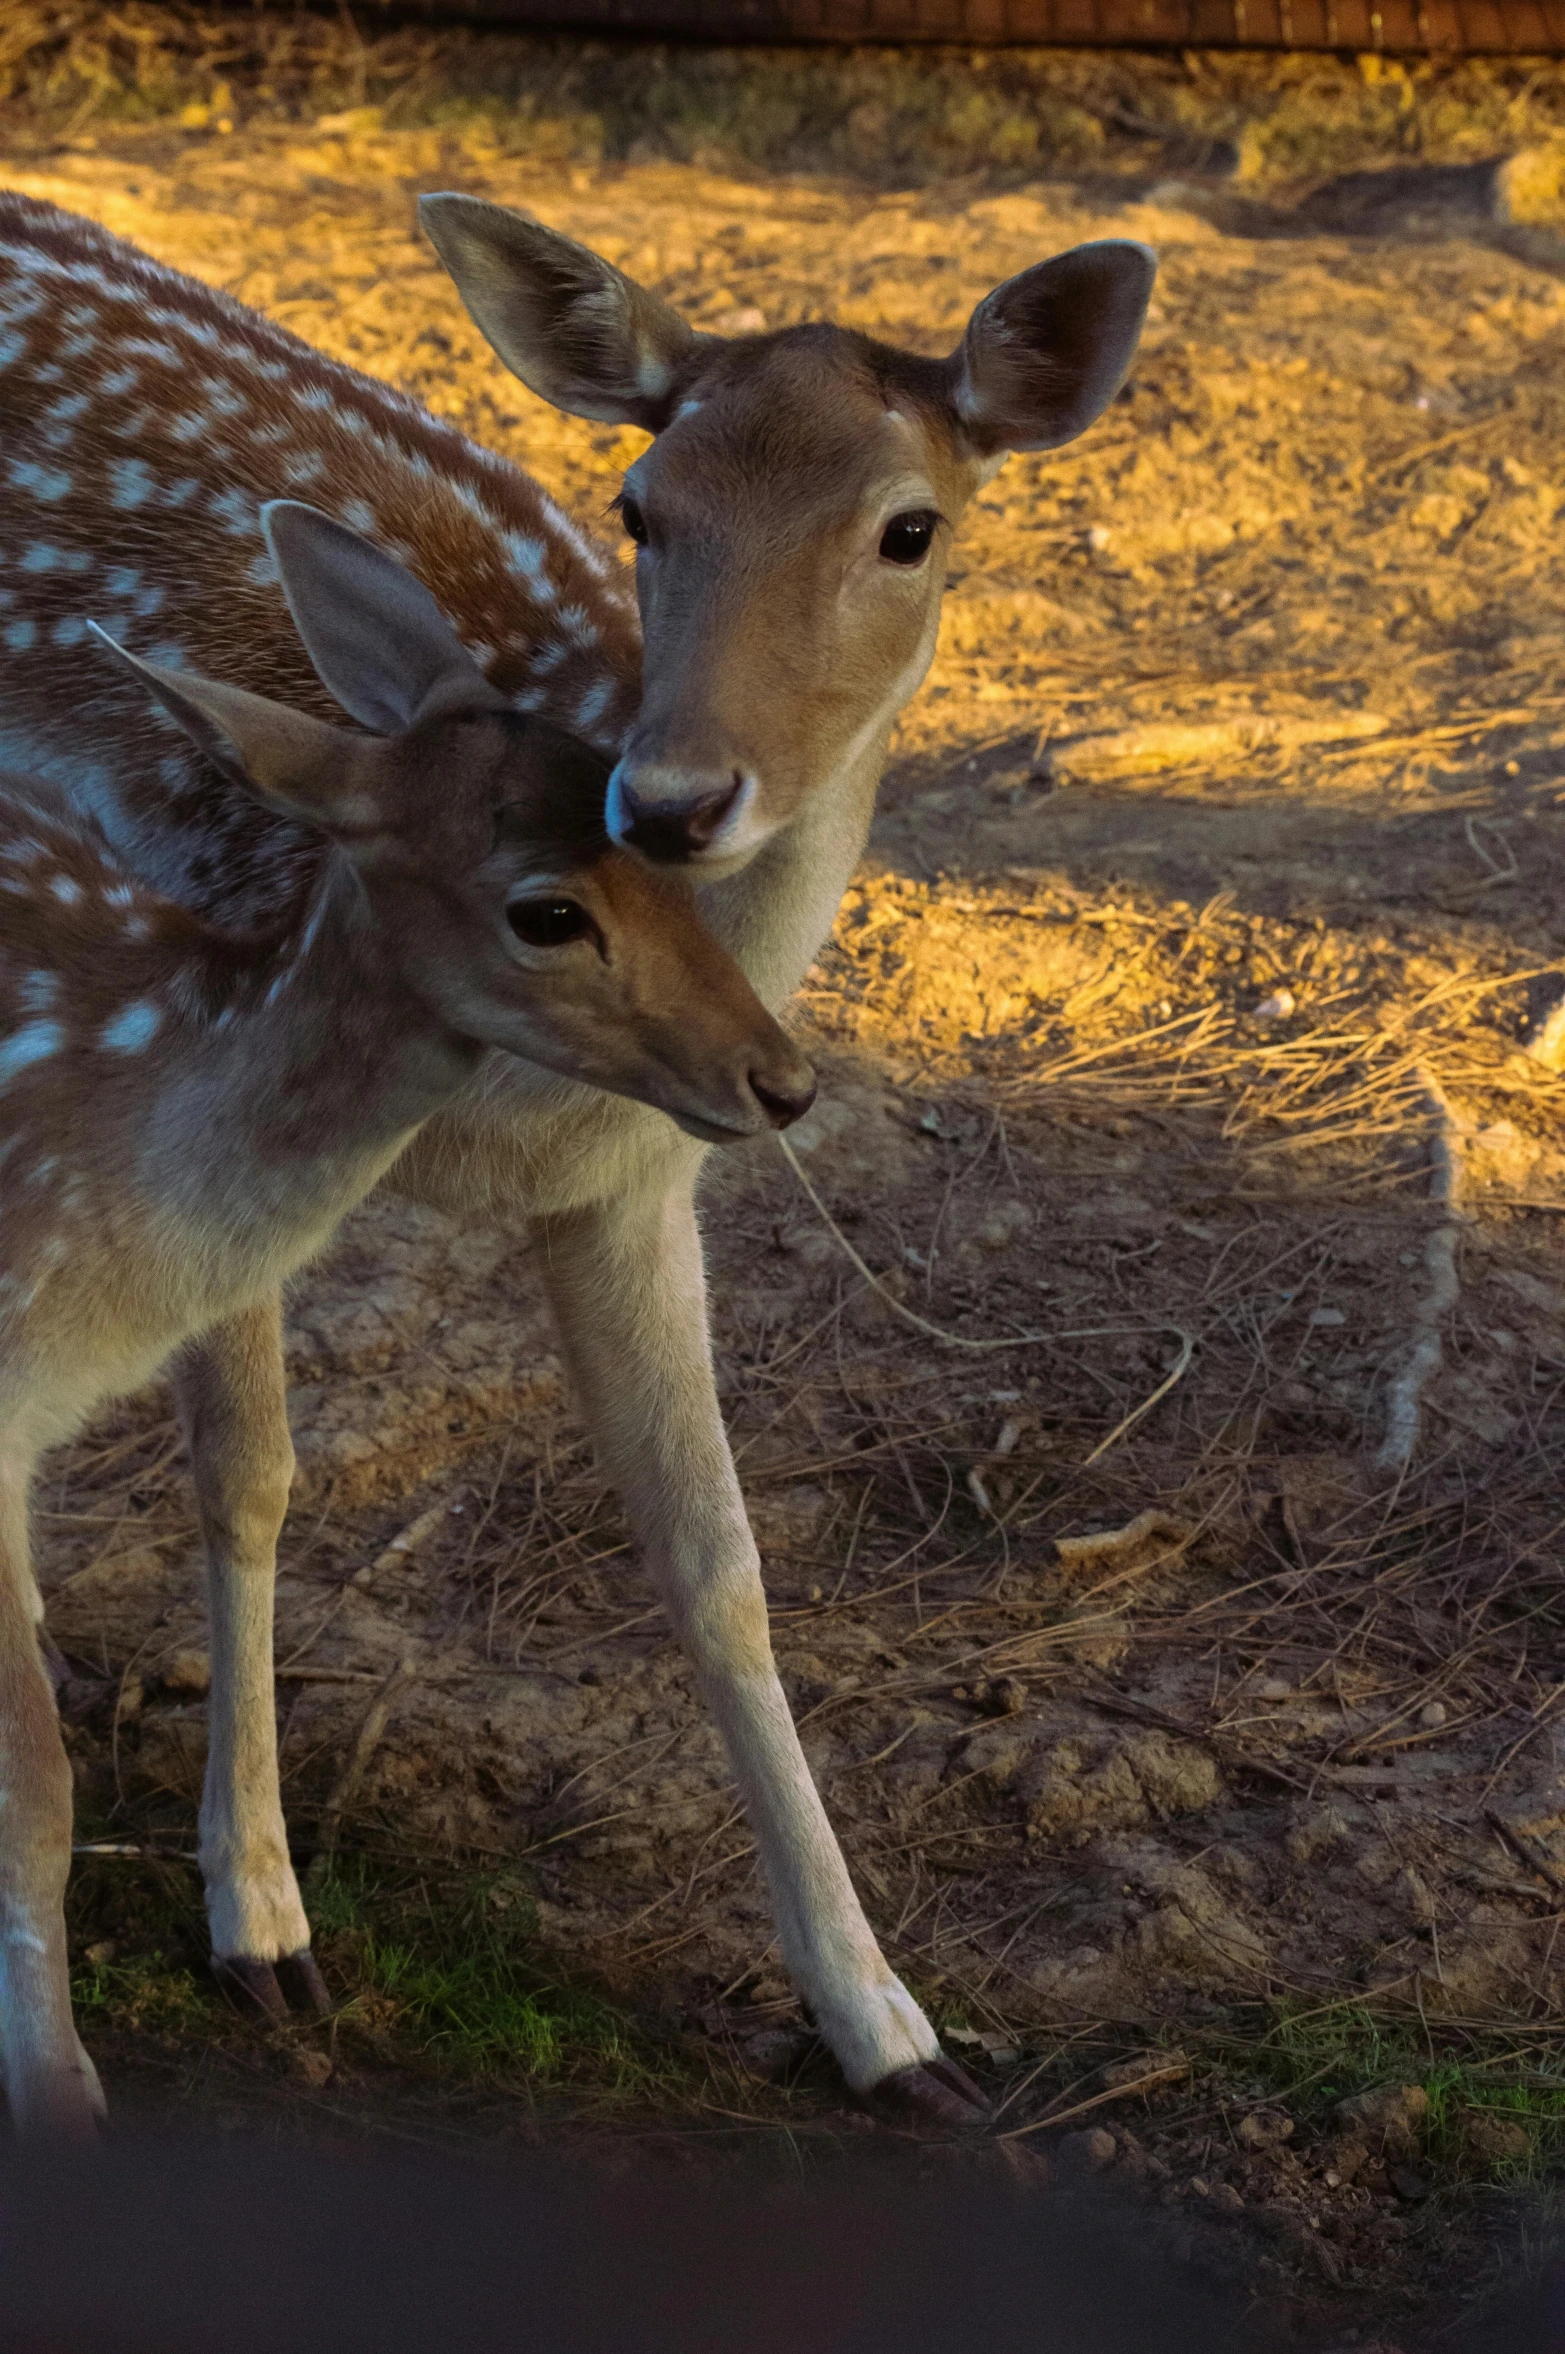 a baby deer rubbing its face on the mother